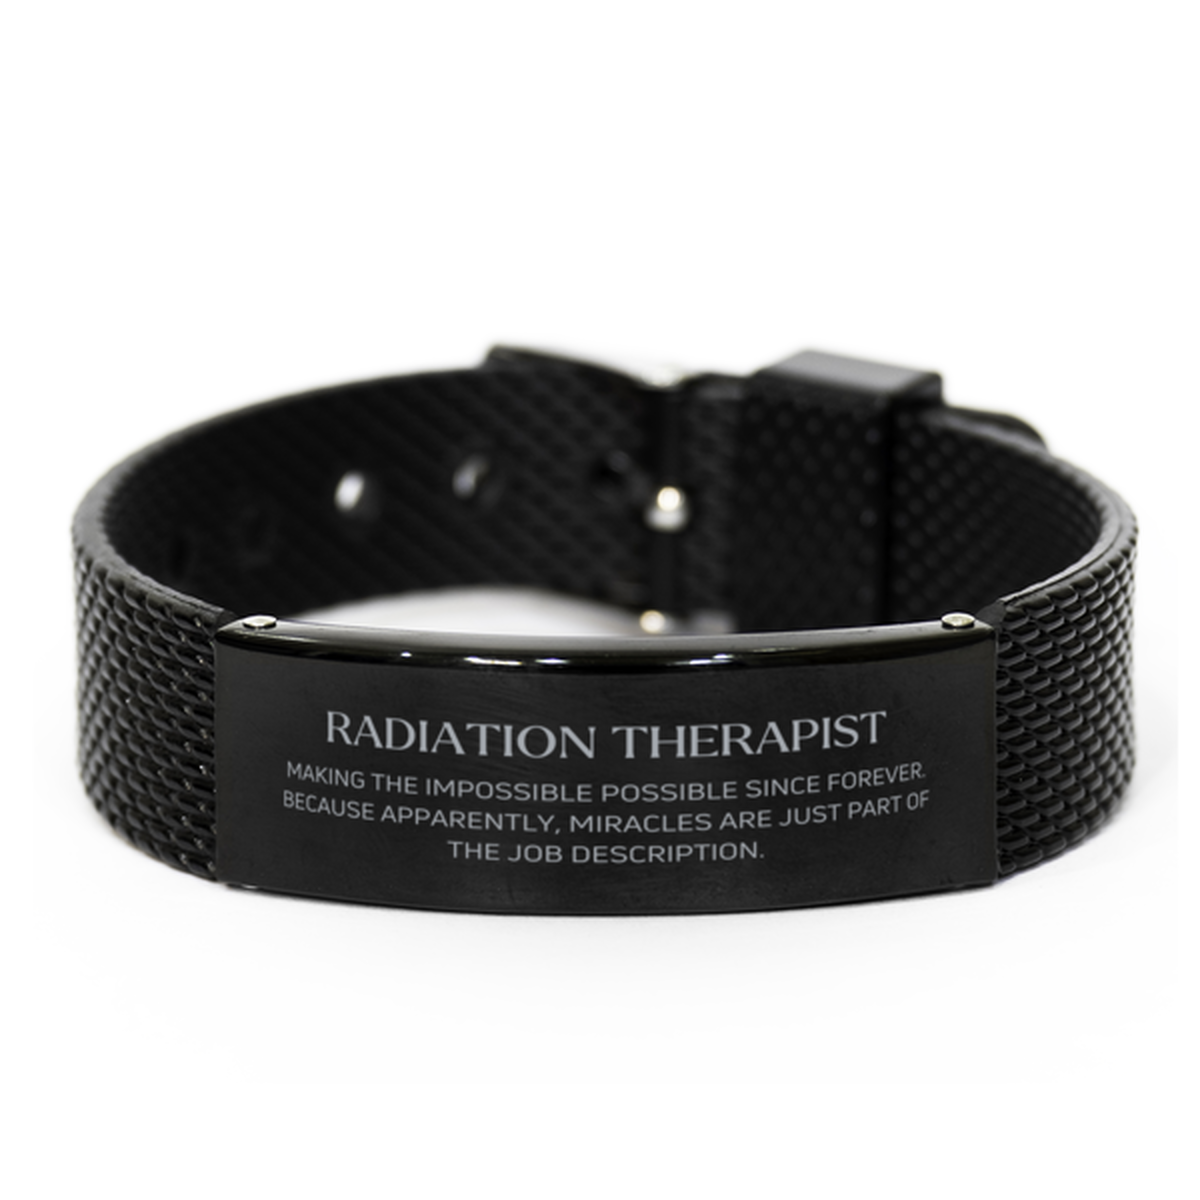 Funny Radiation Therapist Gifts, Miracles are just part of the job description, Inspirational Birthday Black Shark Mesh Bracelet For Radiation Therapist, Men, Women, Coworkers, Friends, Boss